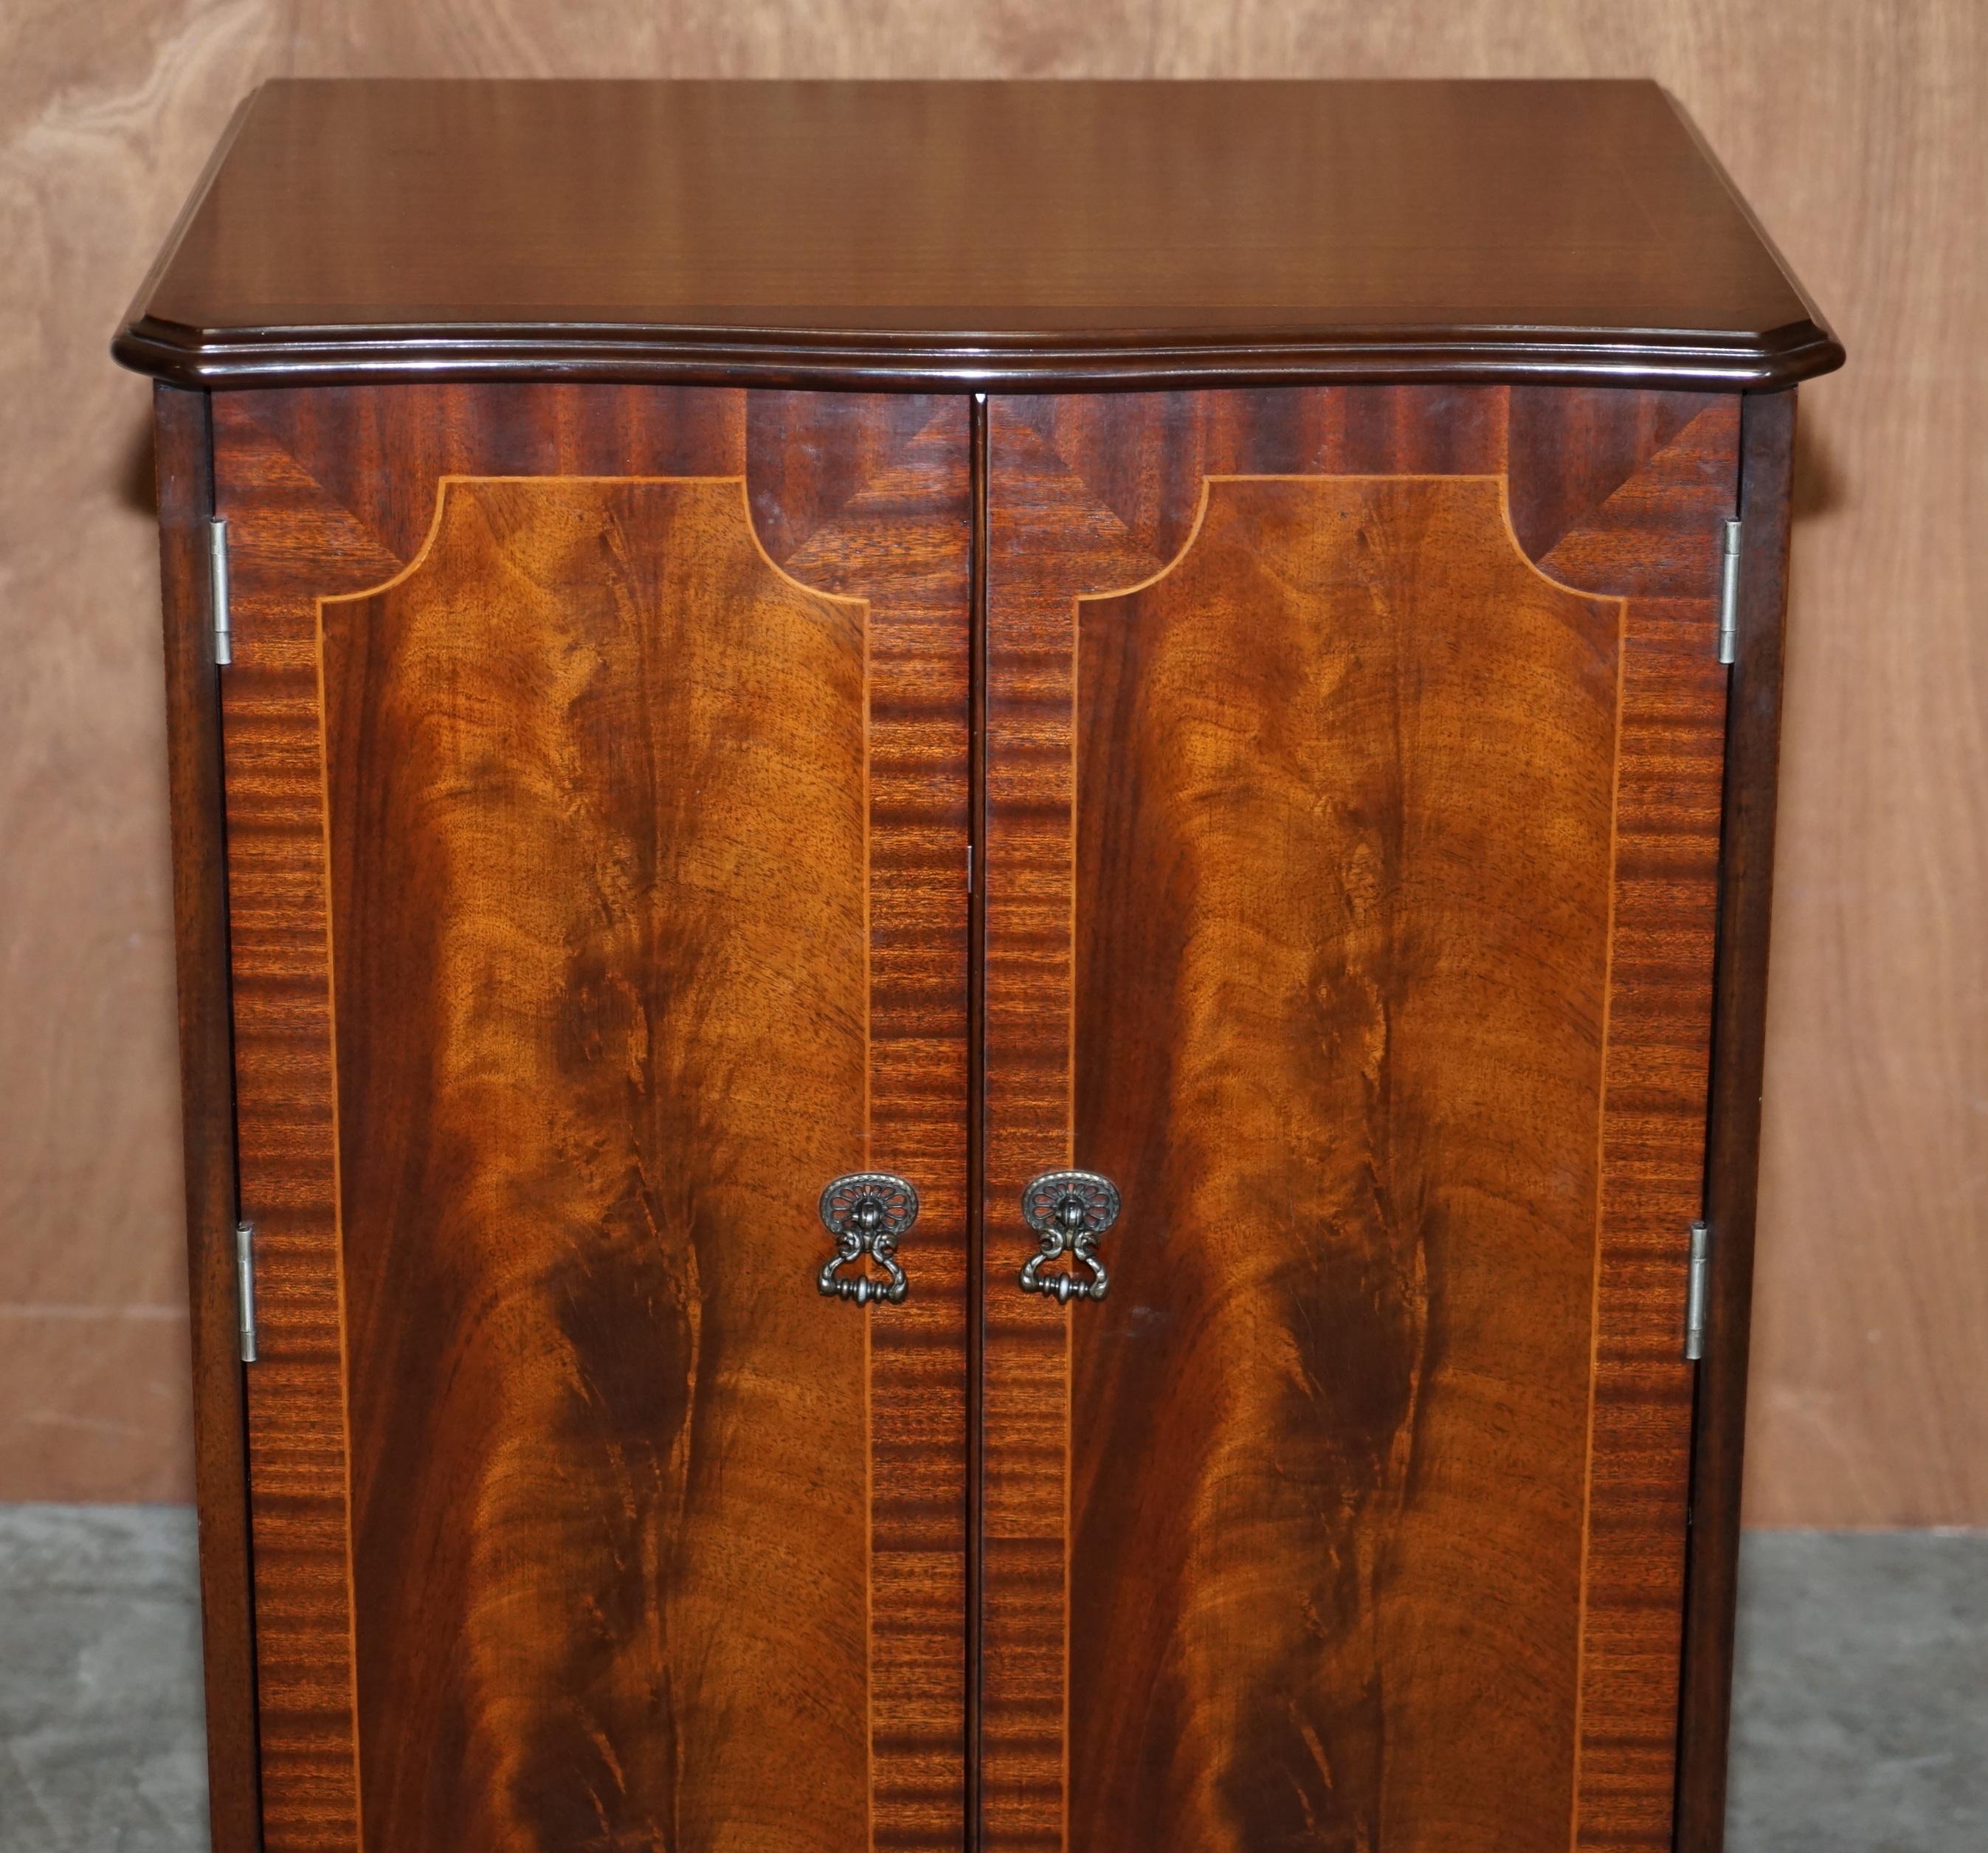 Victorian Harlow Productions Ltd Vintage Flamed Hardwood Record Player Cabinet Cupboard